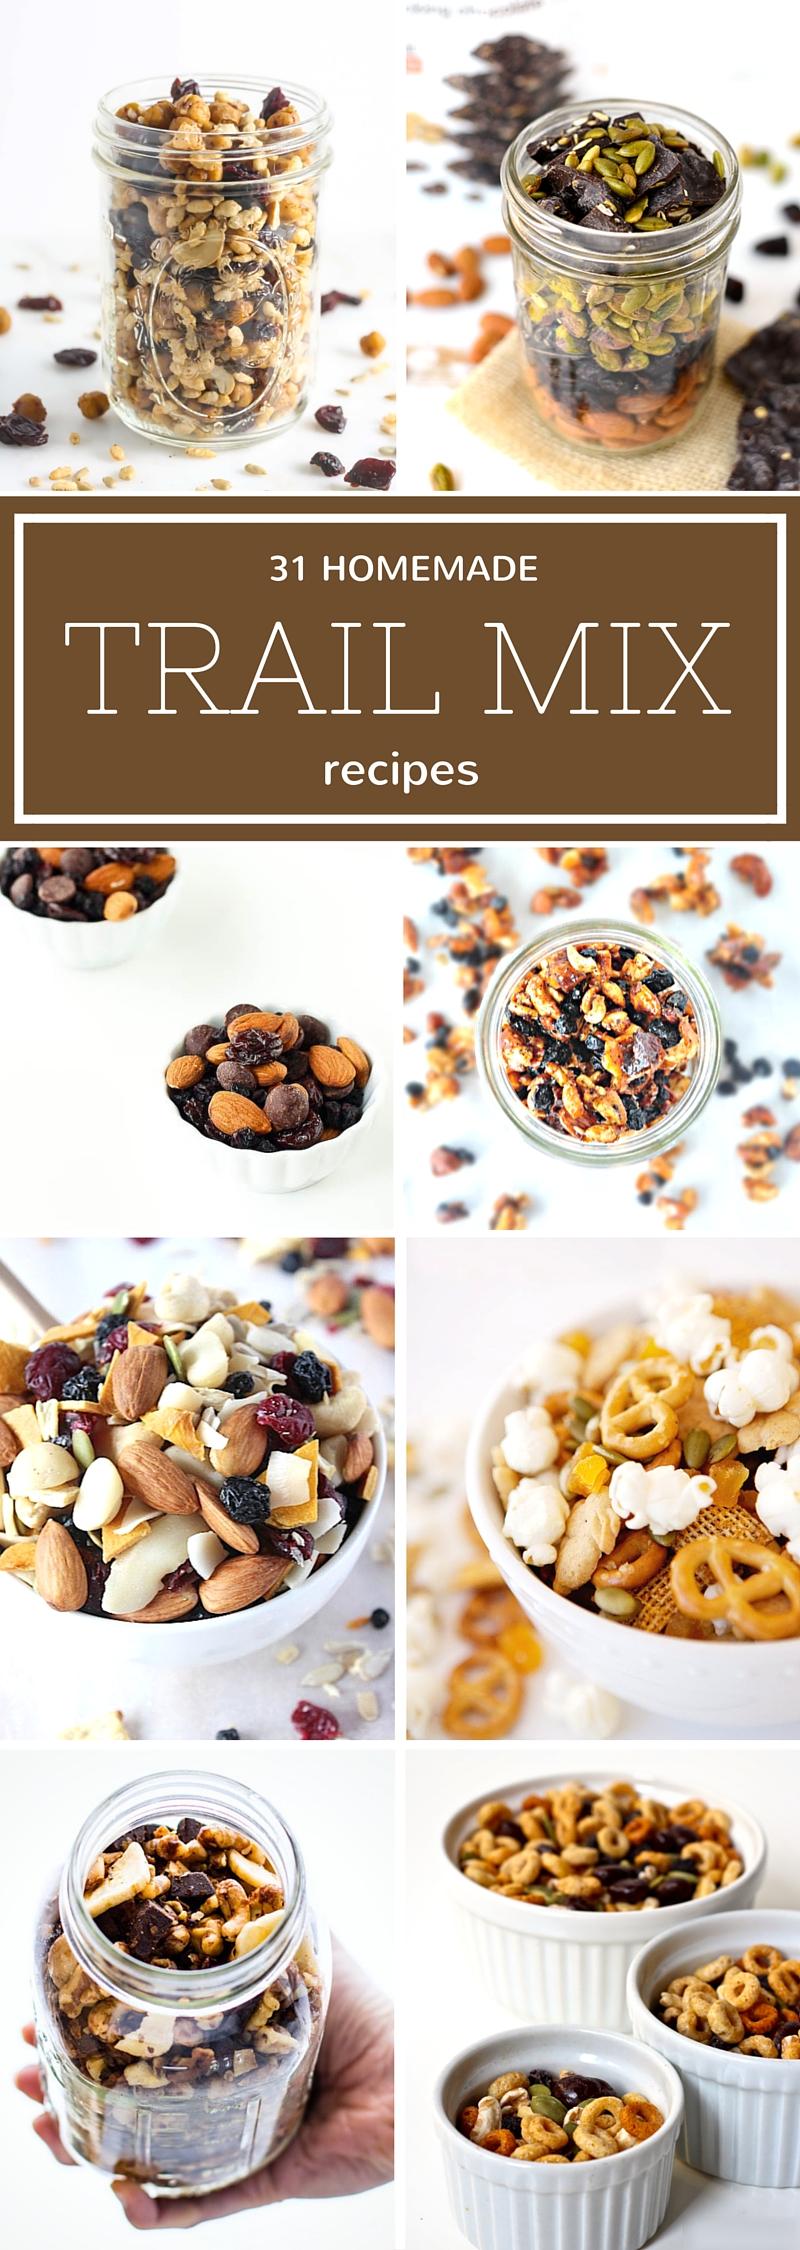 31 homemade trail mix recipes you will love to try out